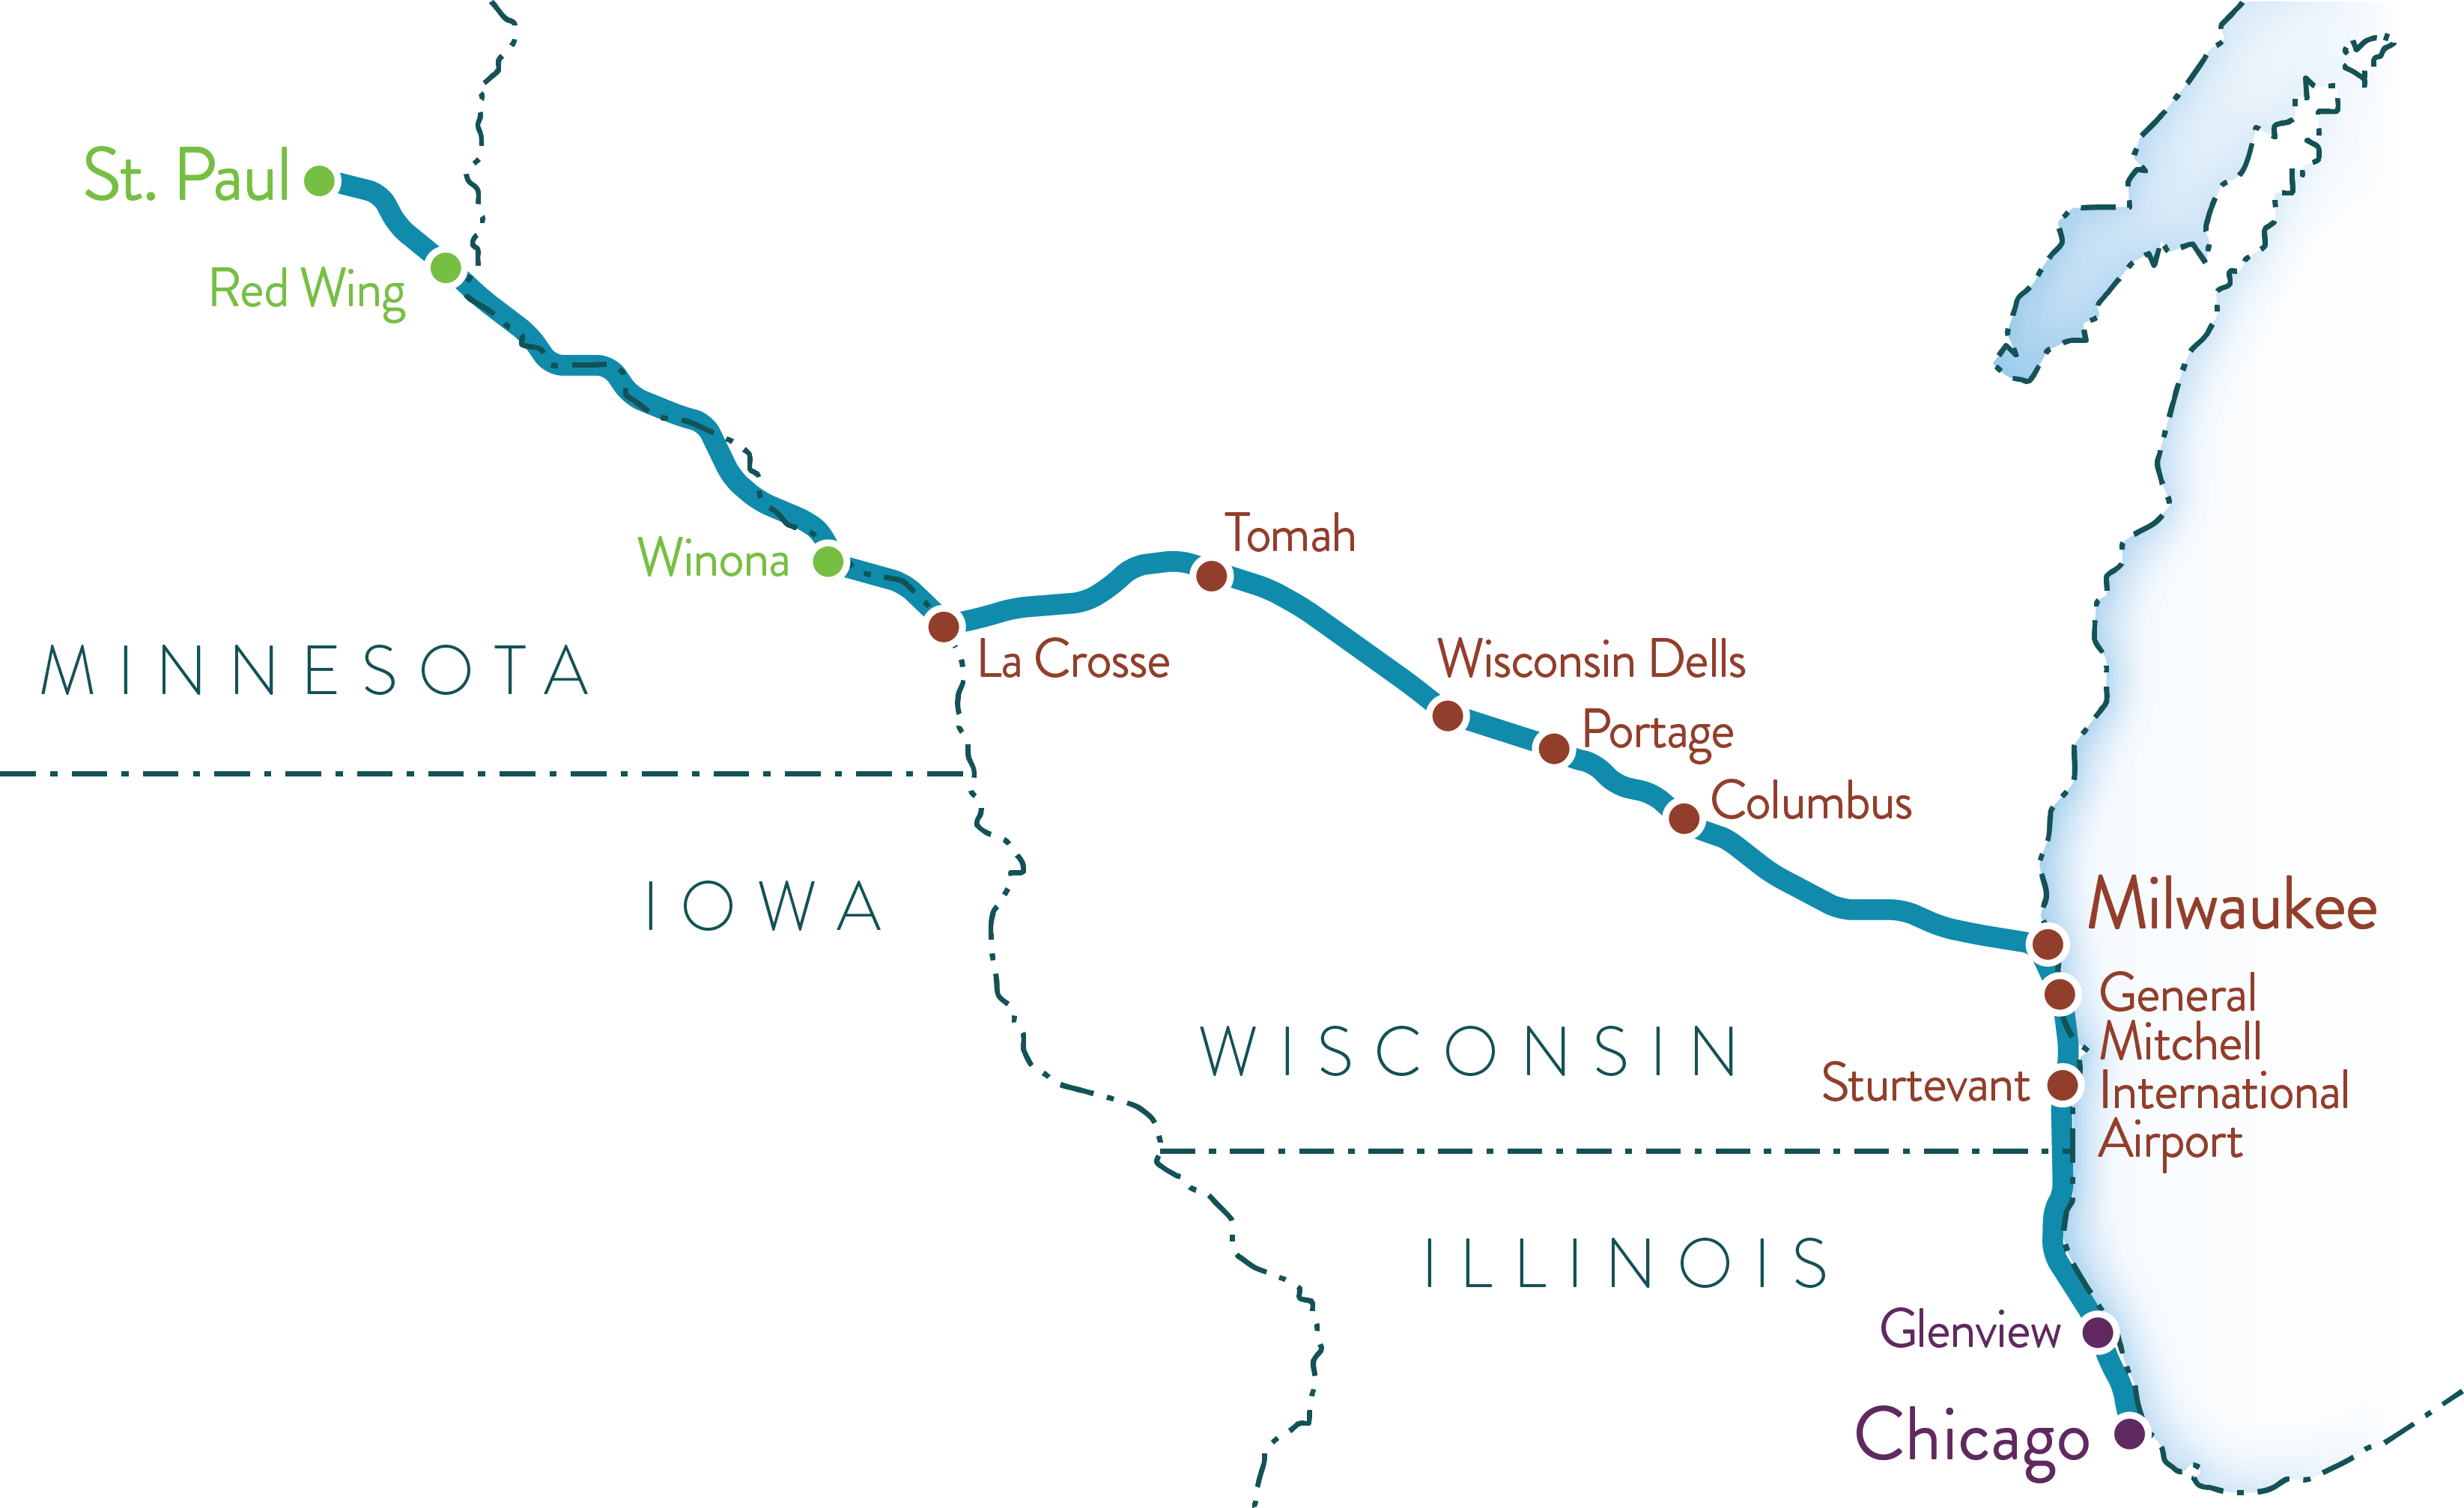 Twin Cities-Milwaukee-Chicago train map. Image from the Minnesota Department of Transportation.